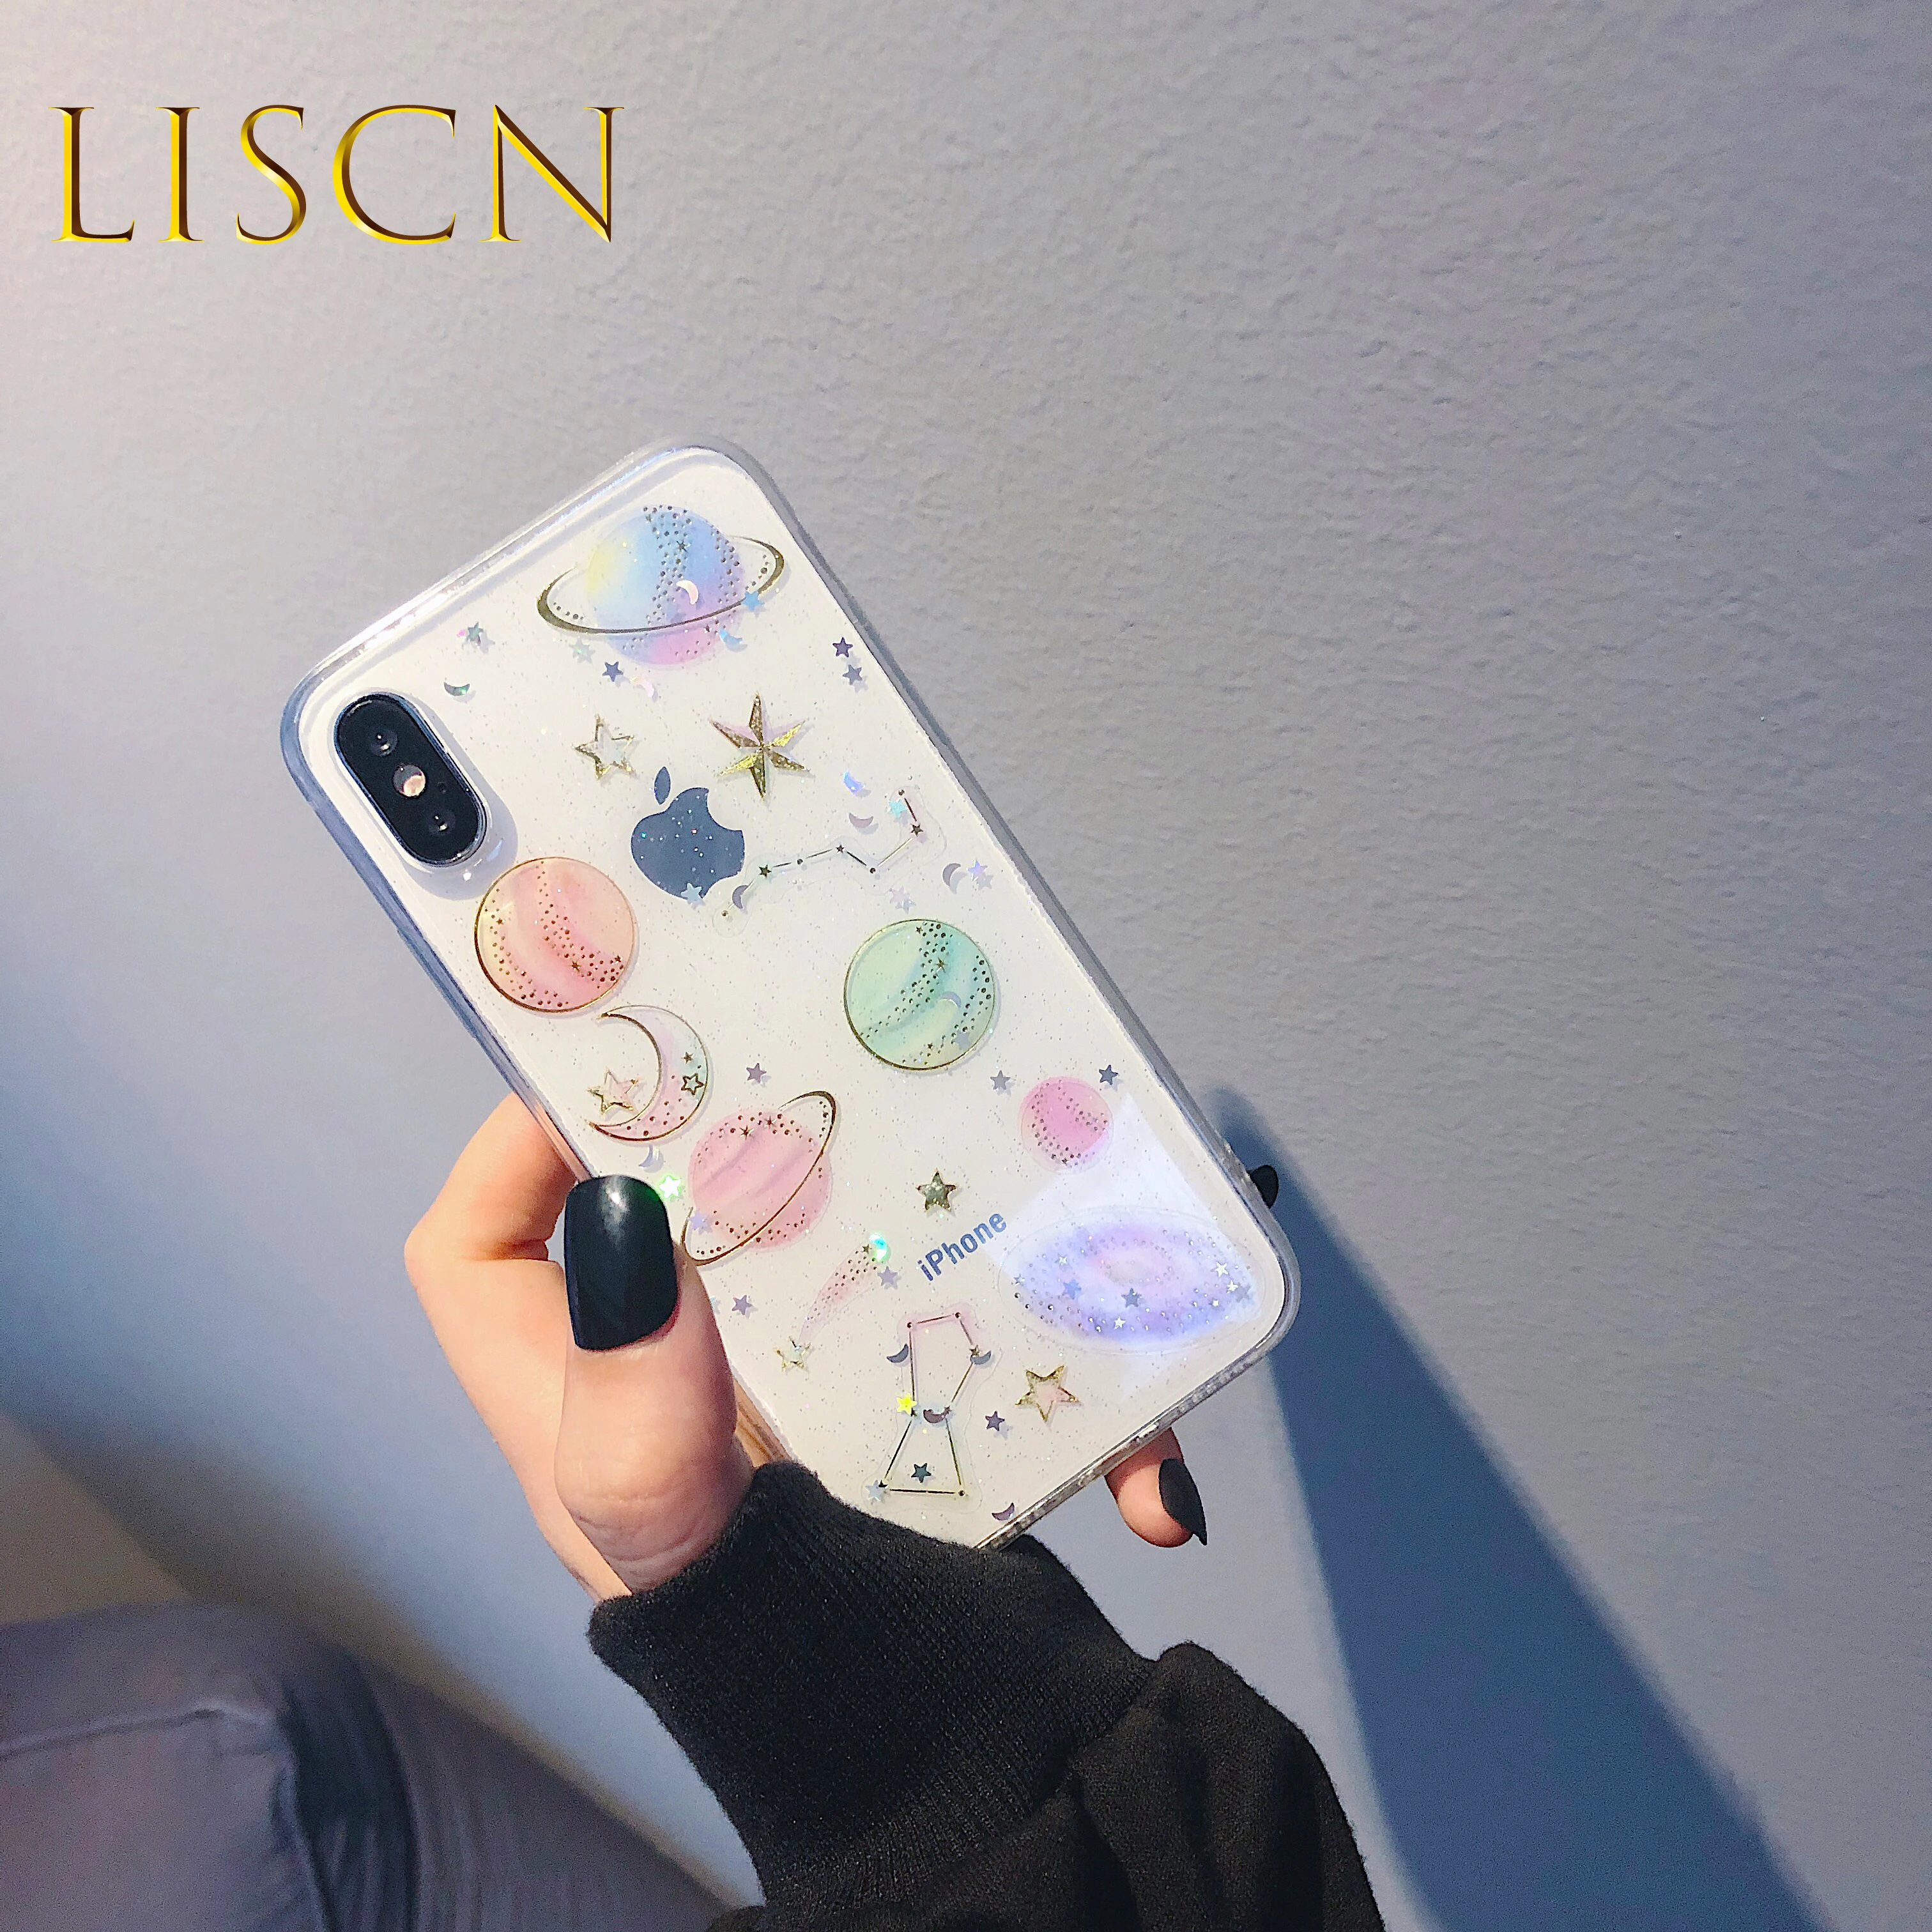 

LISCN Hot Cute Starry Pattern Phone Case For Iphone 6 6S 6P 7P 8P X XS XR Xs Max Soft Case for iphone 7 8